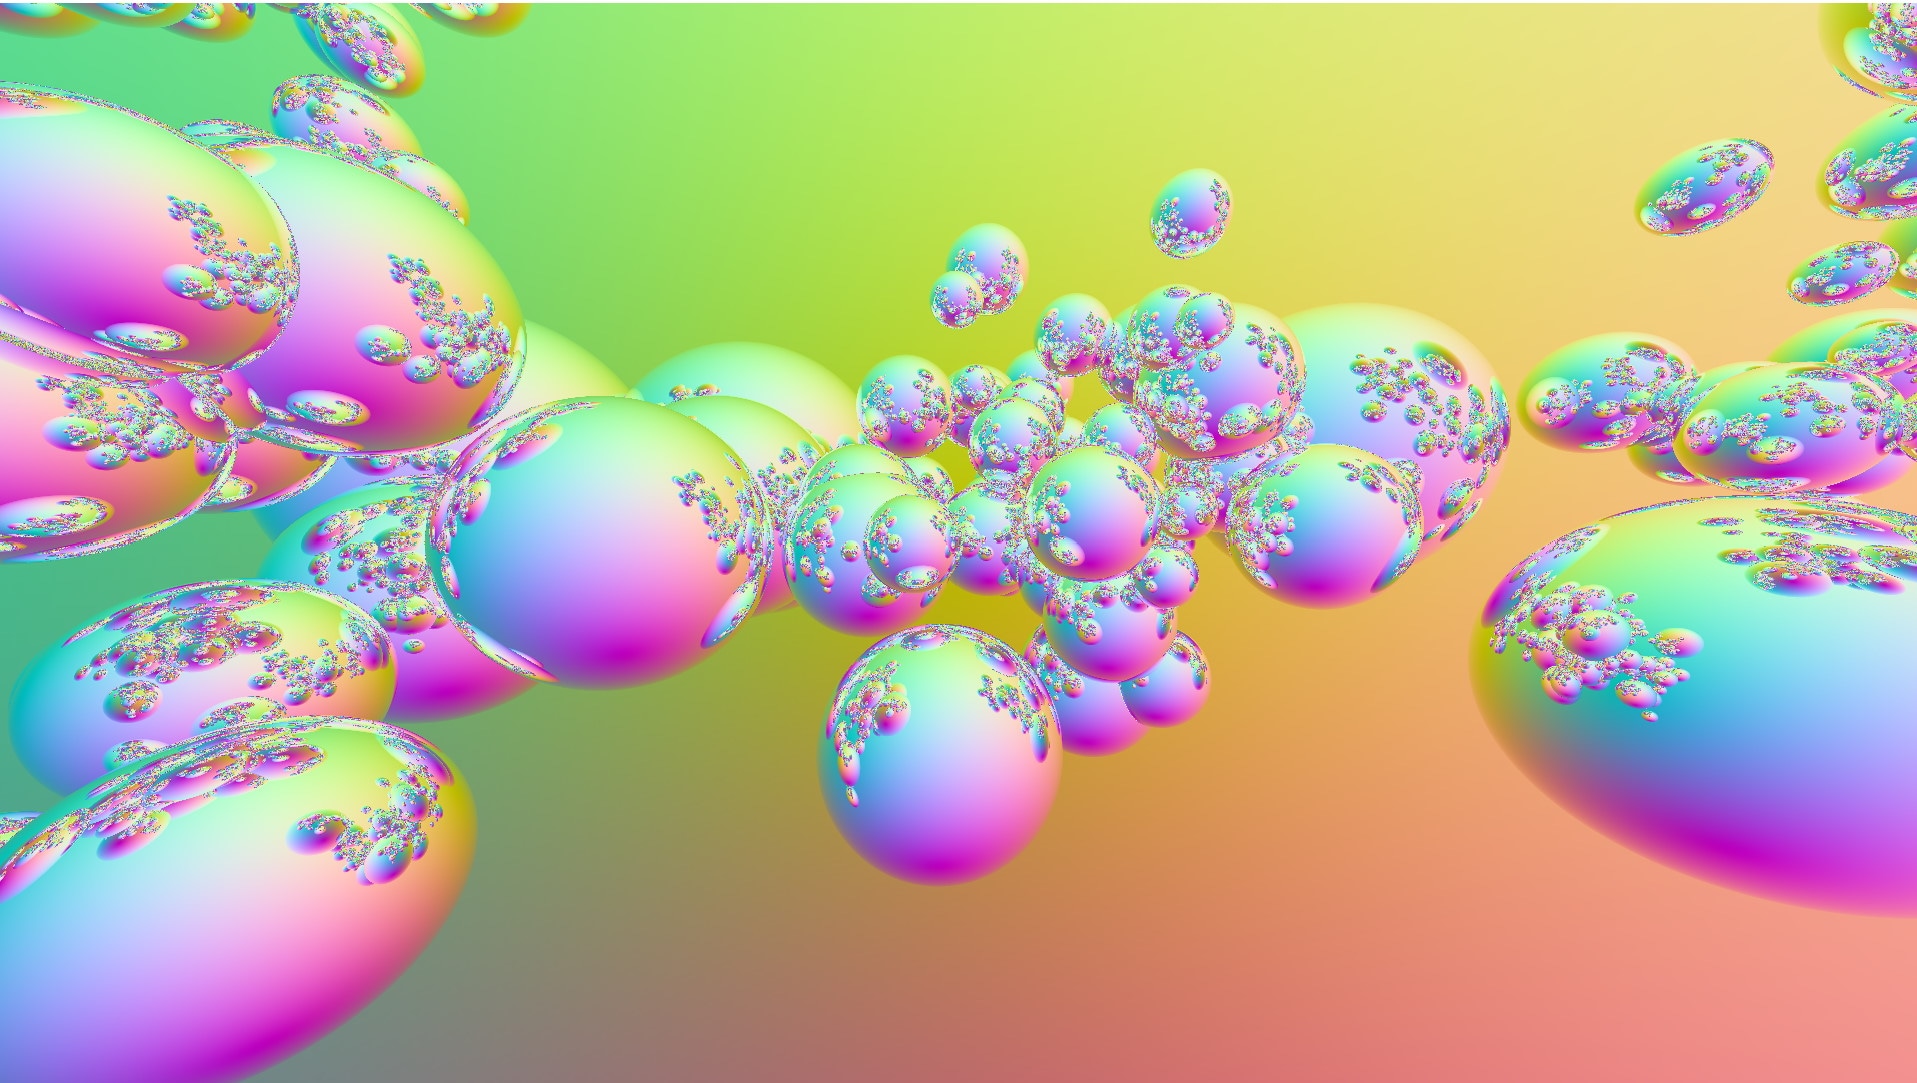 Raytraced reflective bubbles